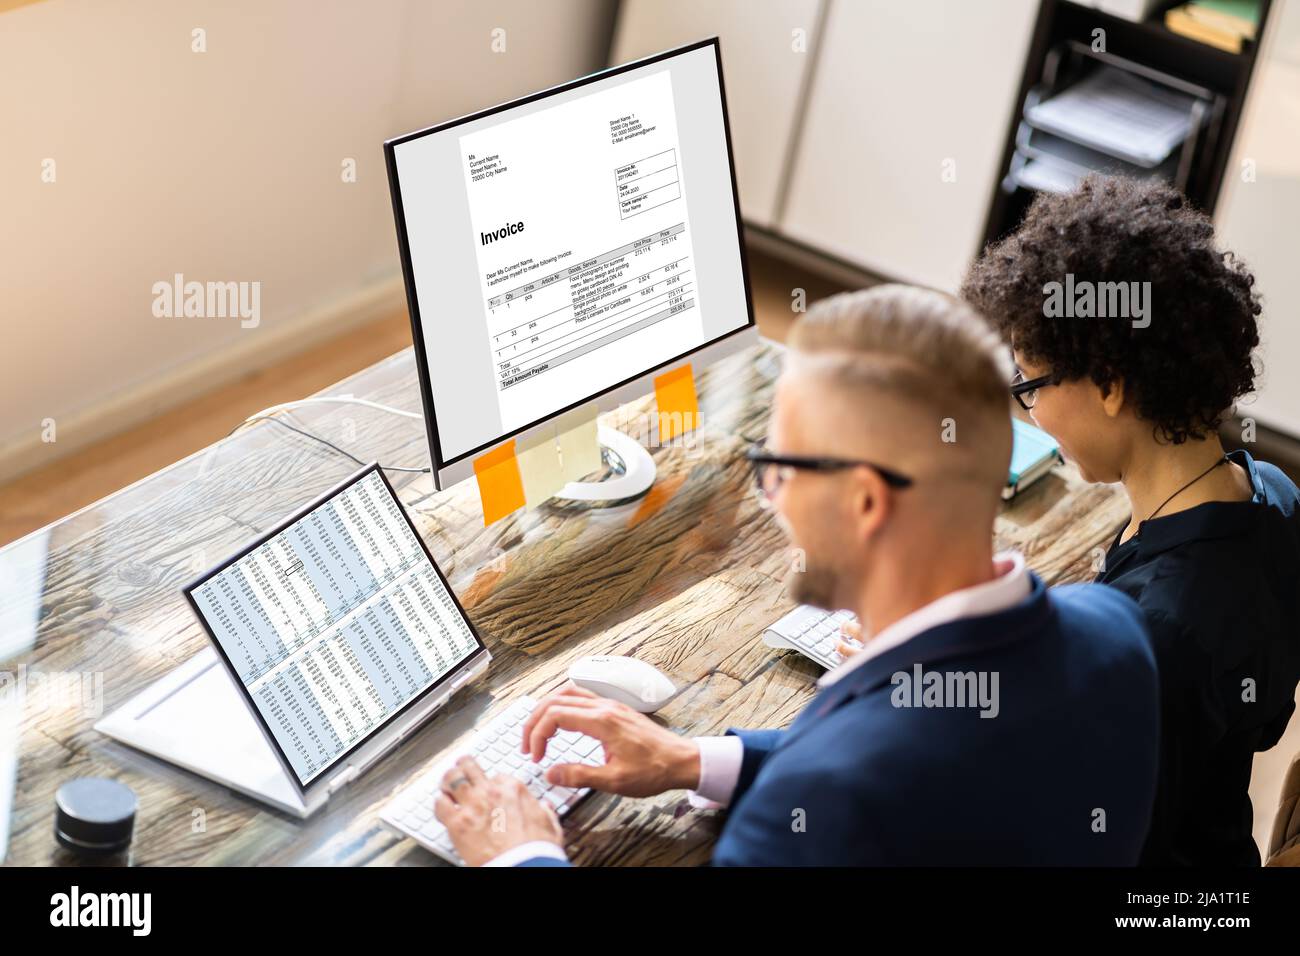 Analyst Working With Spreadsheet On Computer Screen Stock Photo